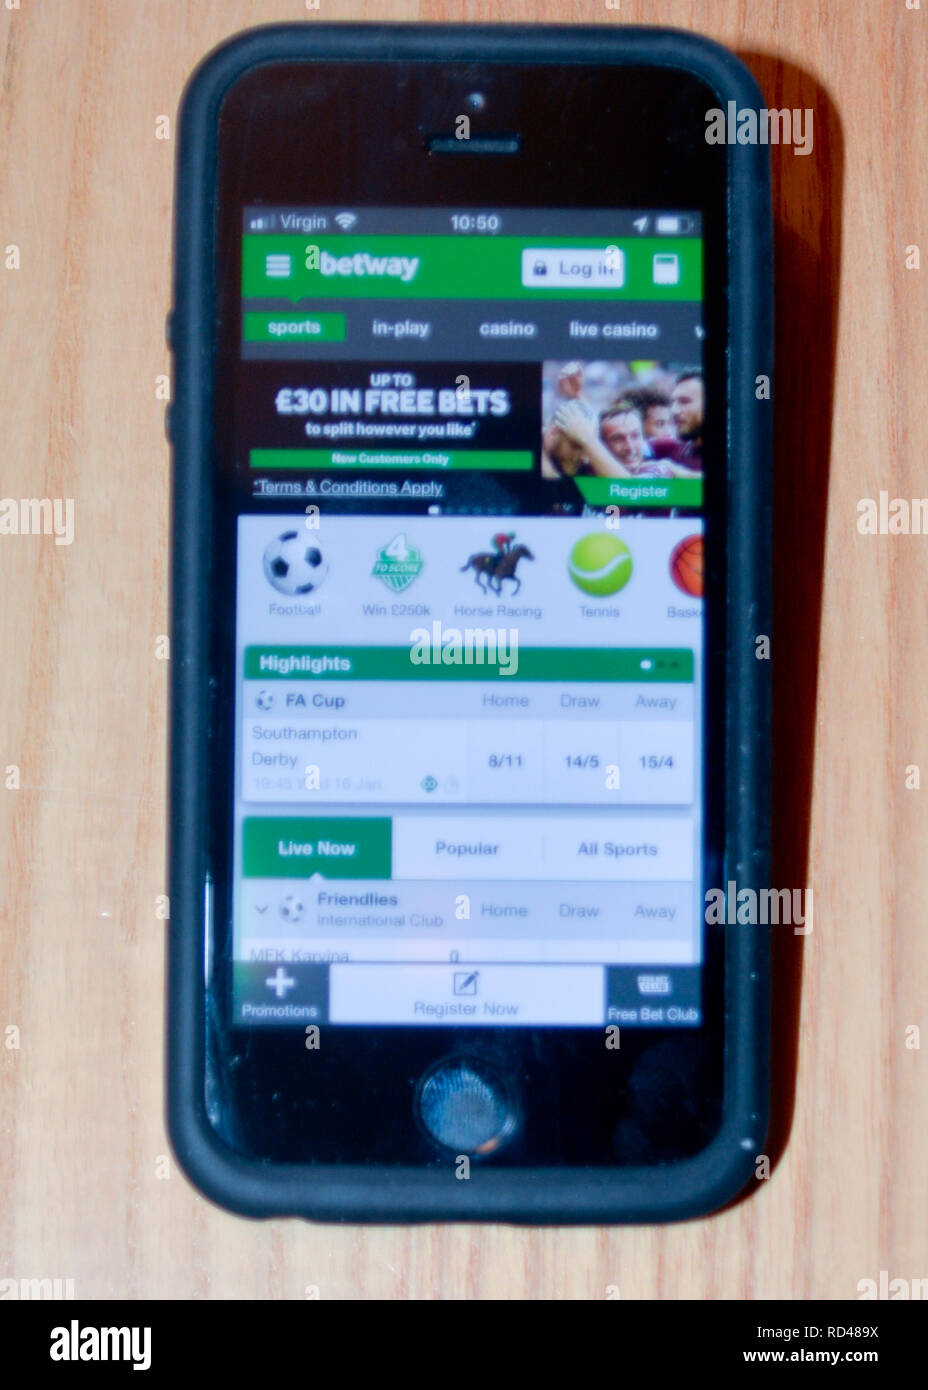 Betway sports gambling app on a smart phone Stock Photo